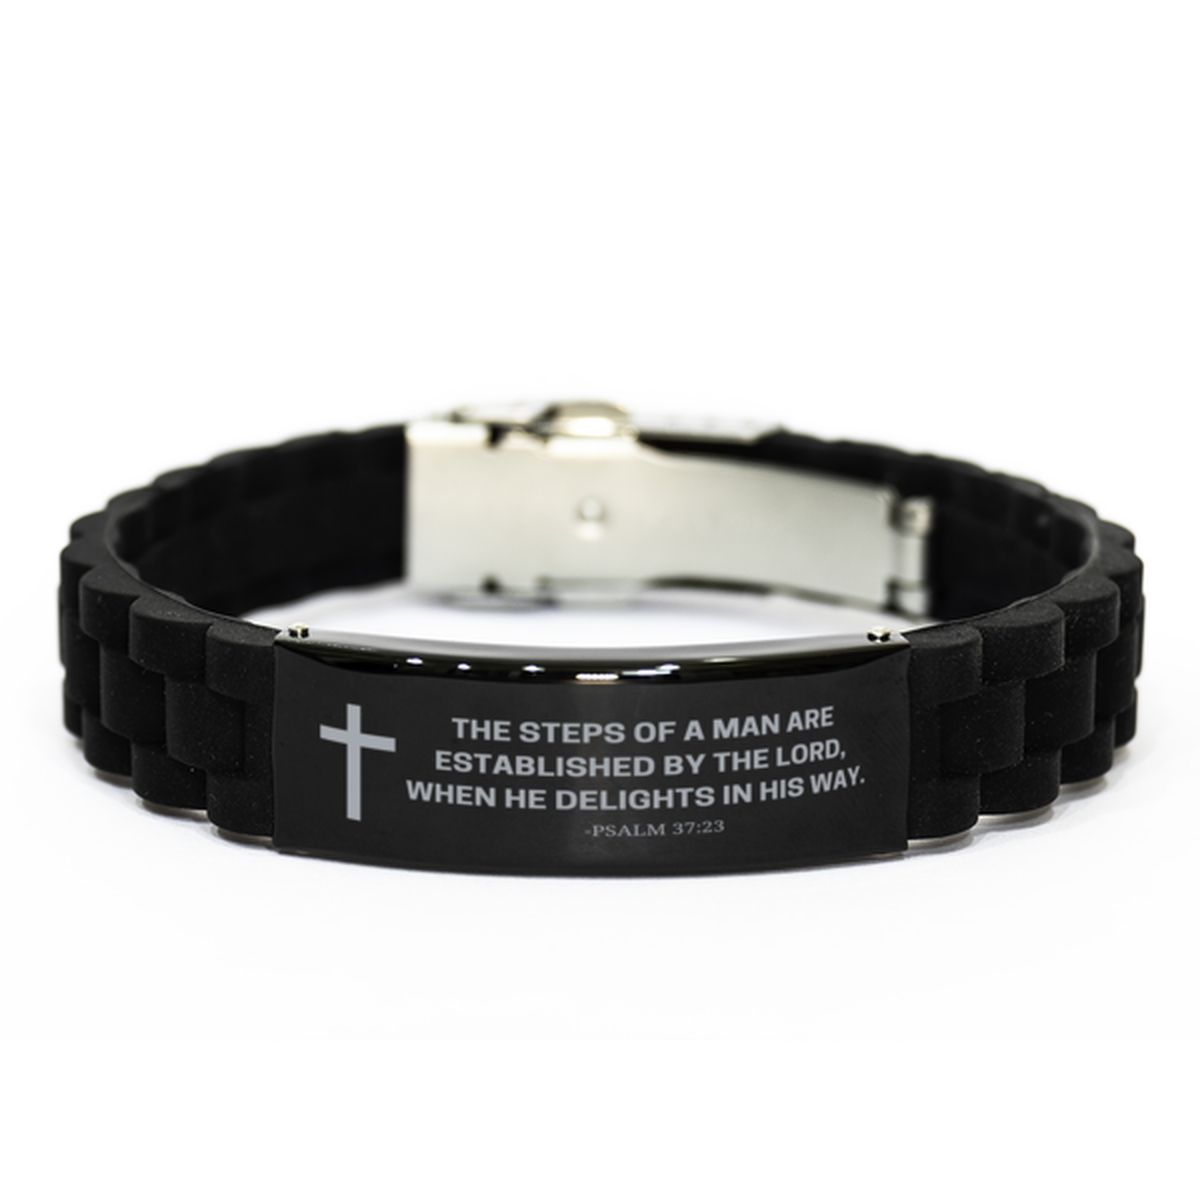 Baptism Gifts For Teenage Boys Girls, Christian Bible Verse Black Glidelock Clasp Bracelet, The steps of a man are, Catholic Confirmation Gifts for Son, Godson, Grandson, Nephew